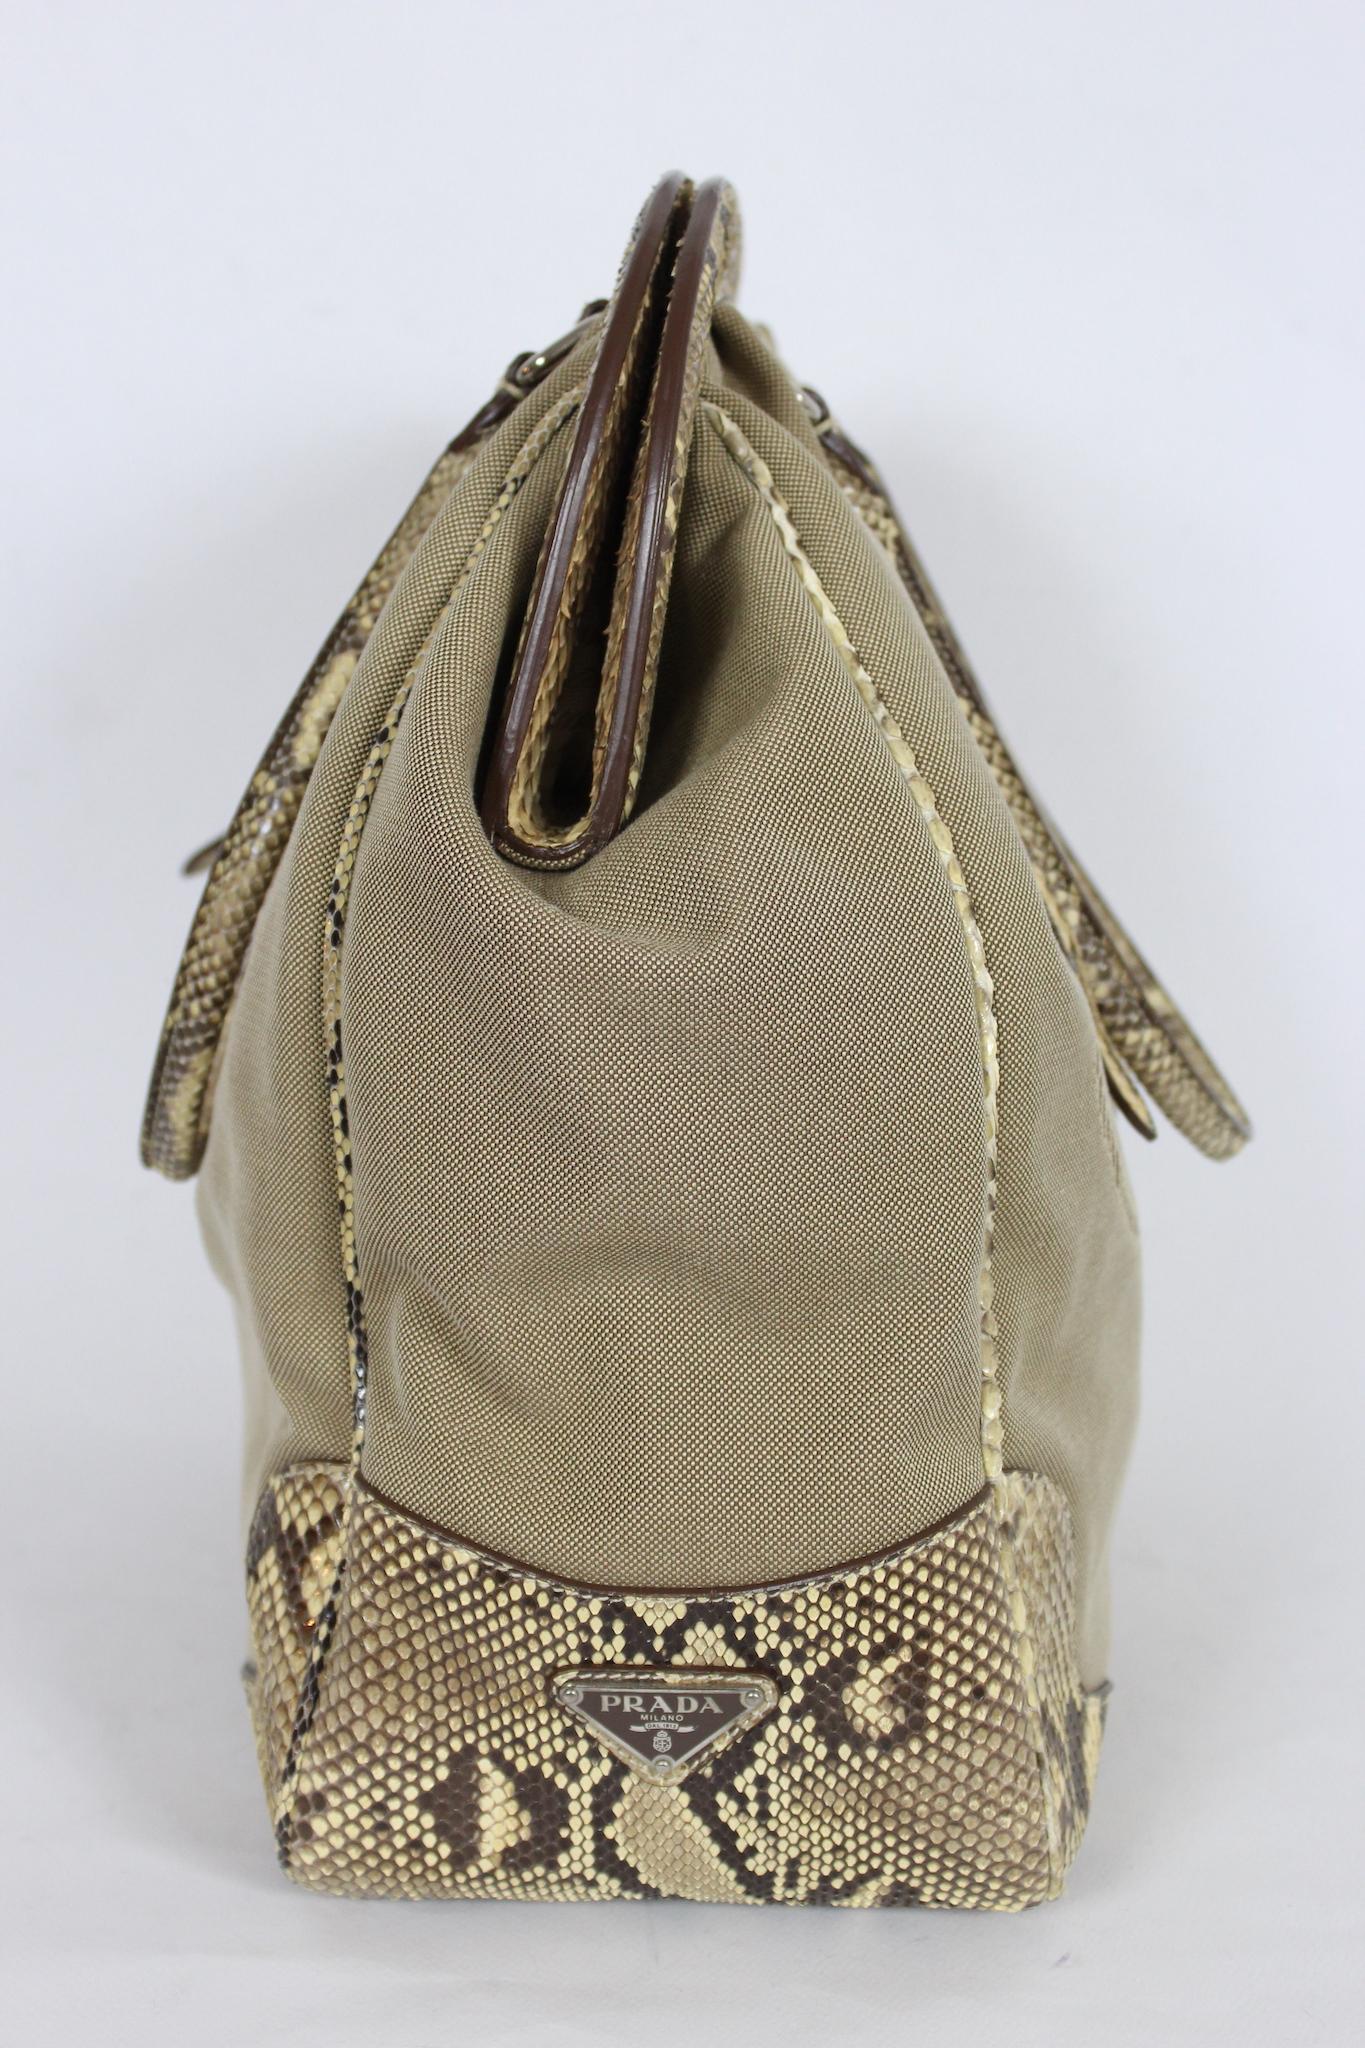 Prada Jacquard Beige Leather Canvas Tote Bag In Excellent Condition In Brindisi, Bt